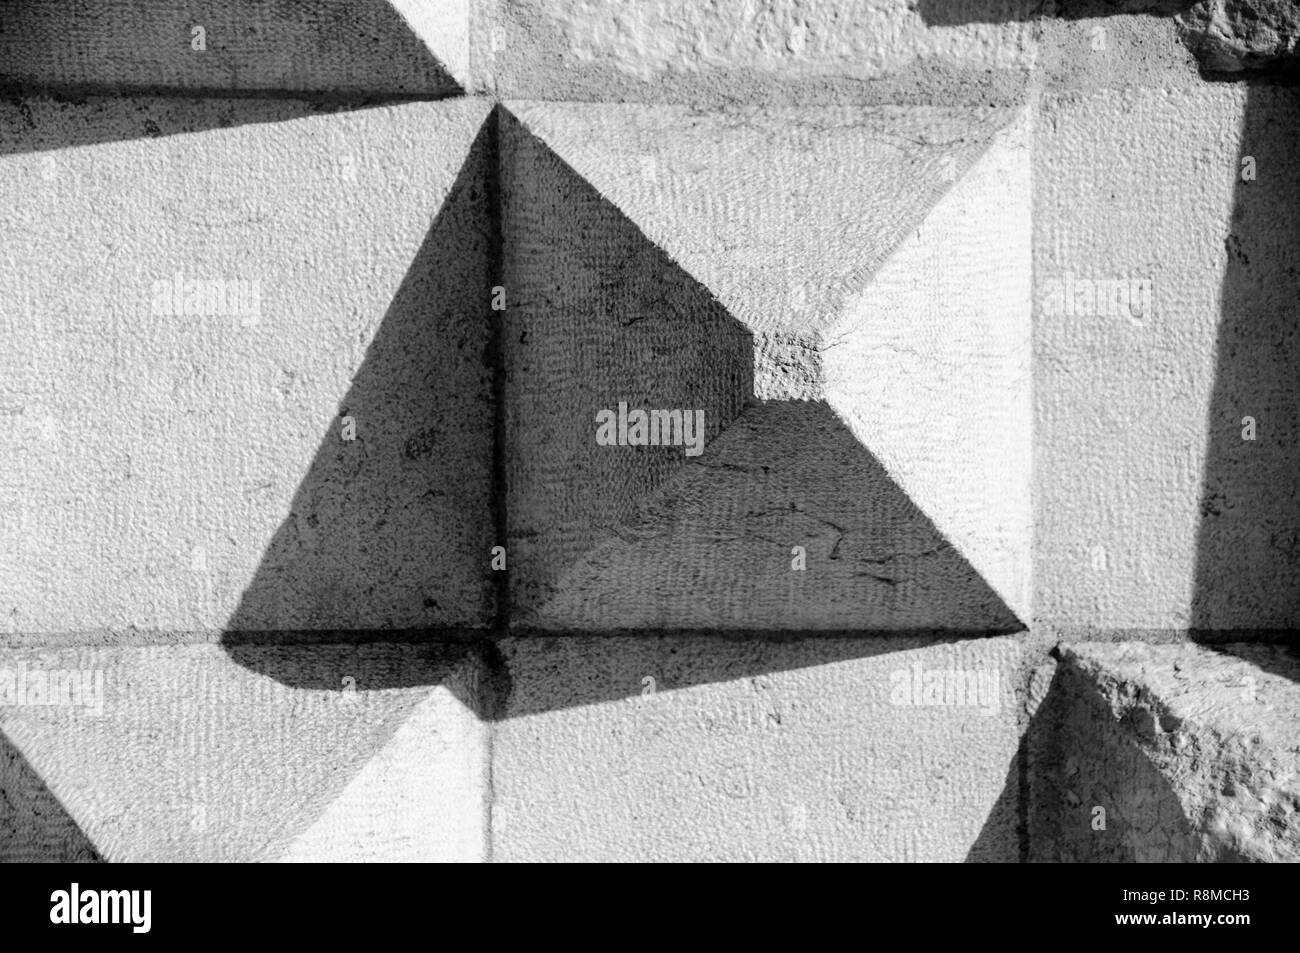 Close-up with a piramide-shape building wall and playing with the shadows Stock Photo